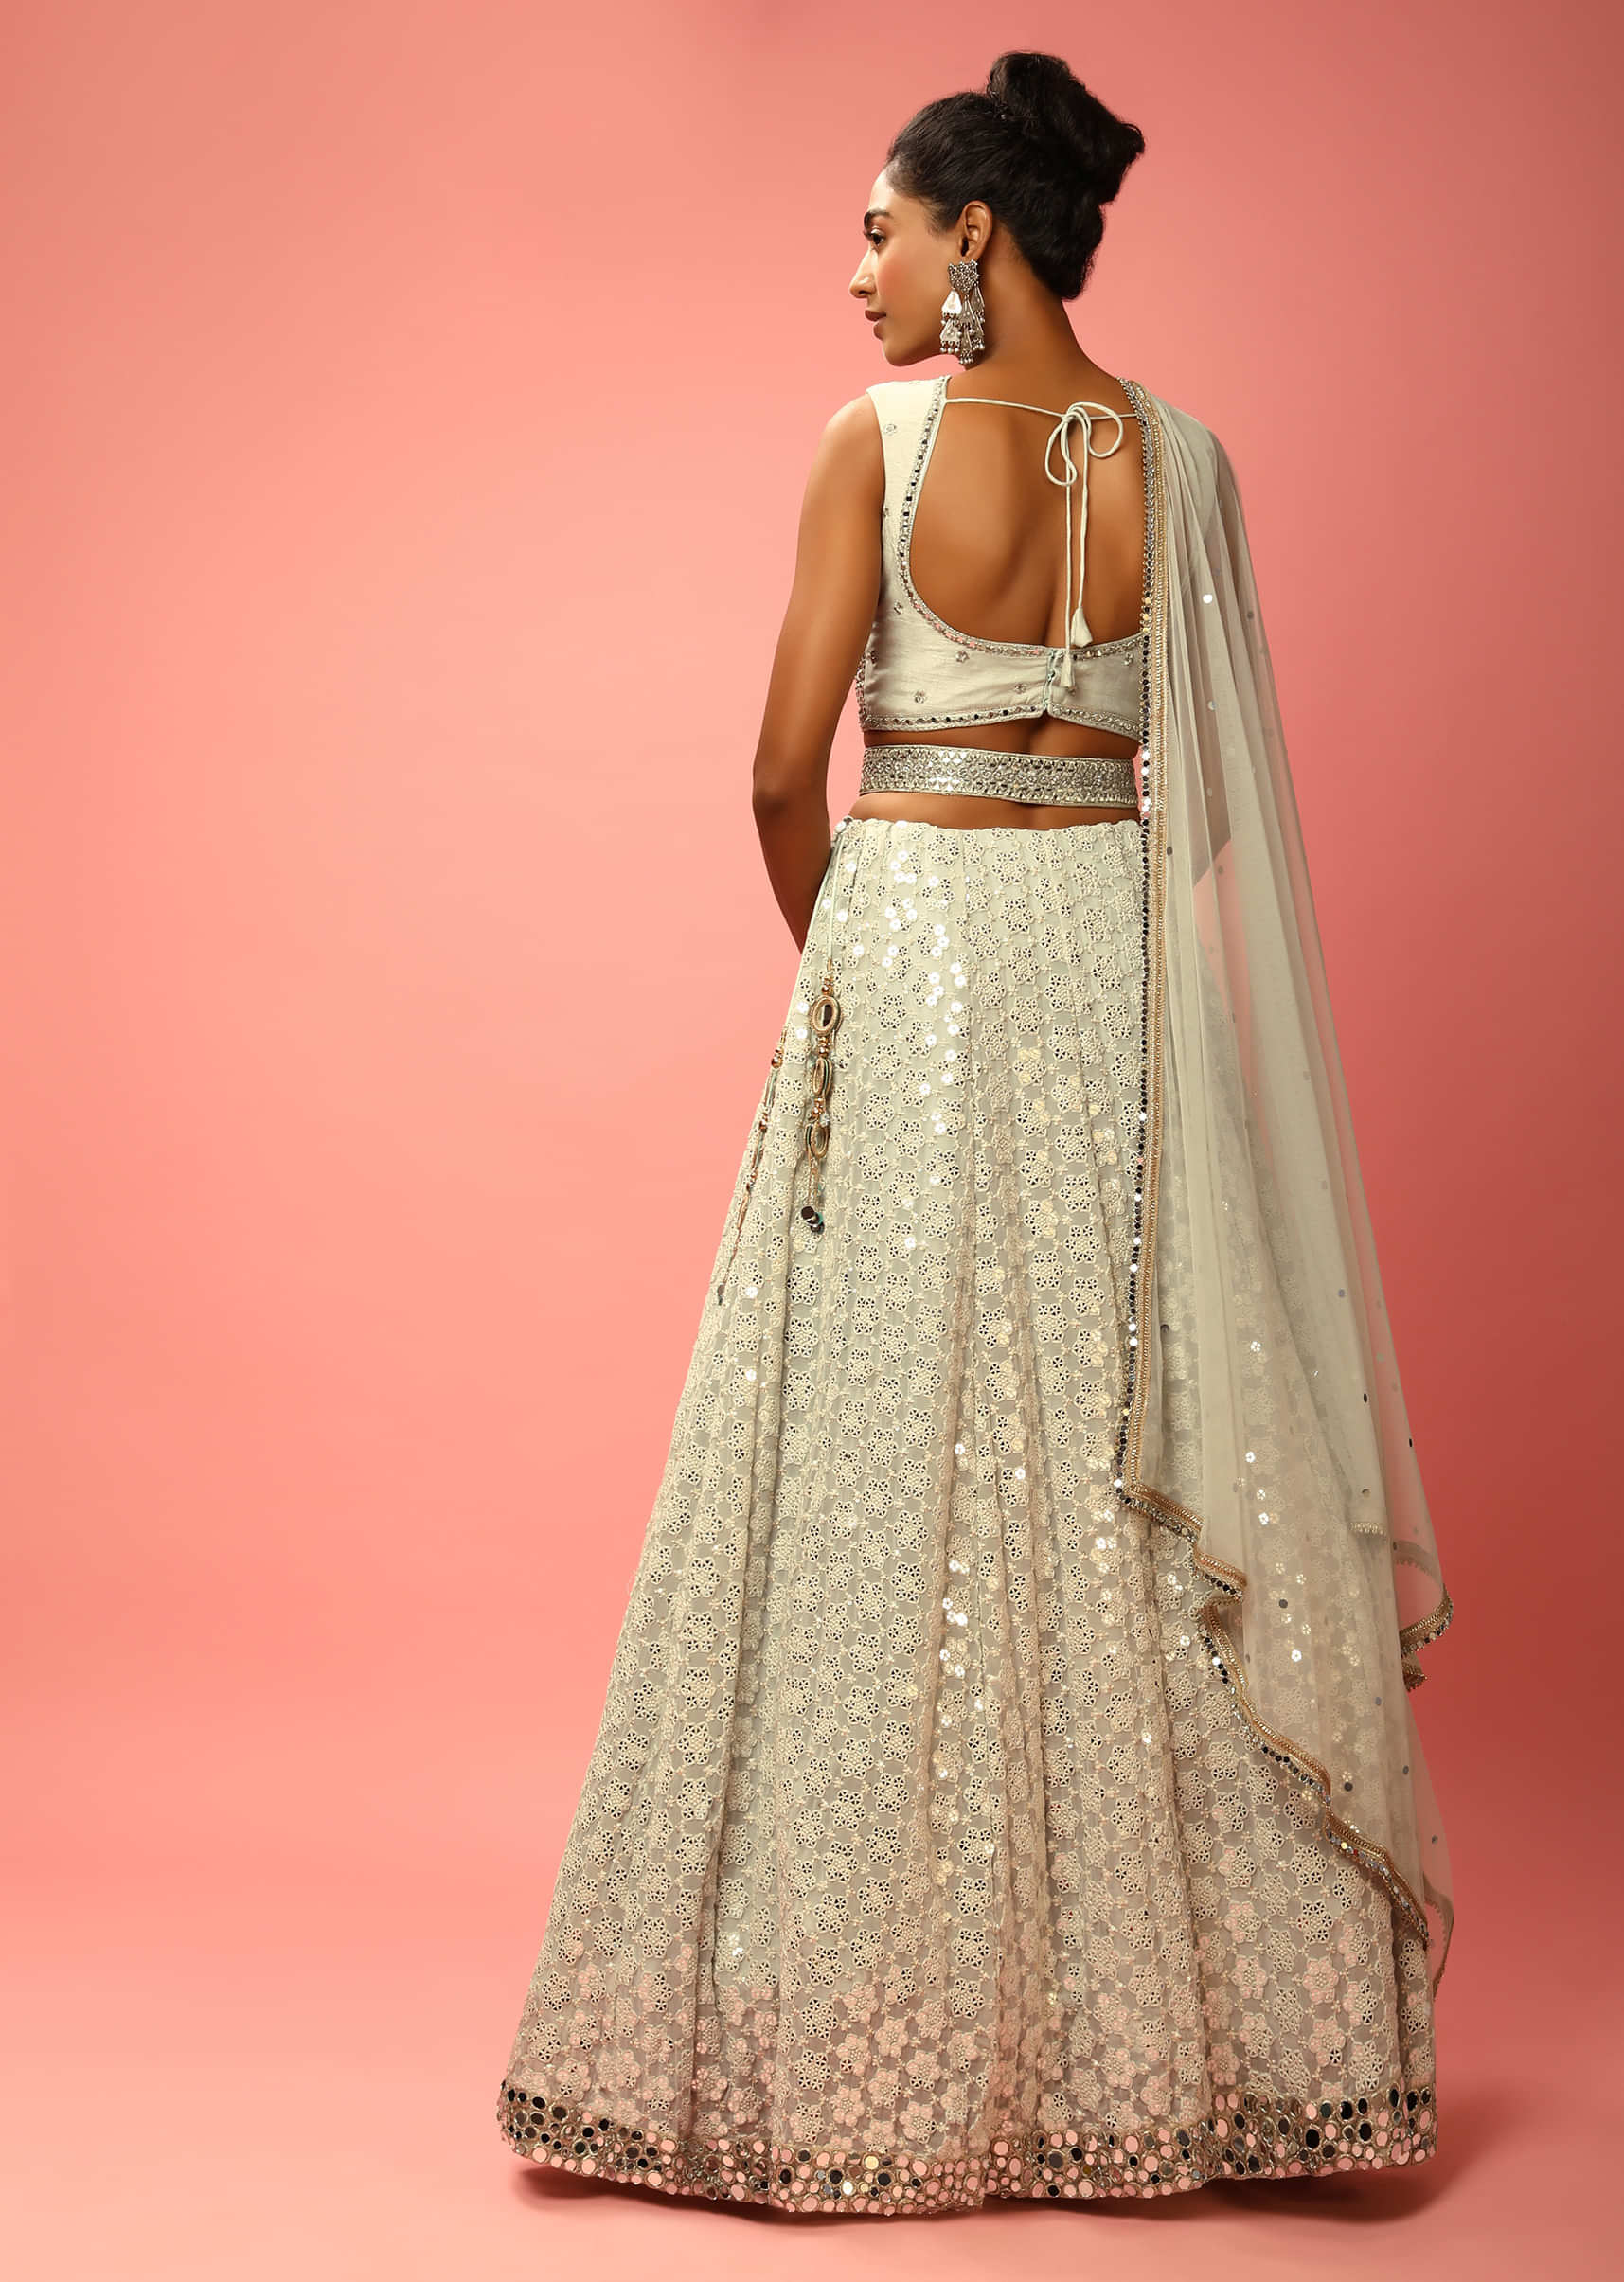 Cloud Grey Lehenga Choli In Georgette With Sequins Embroidered Jaal And Mirror Border 